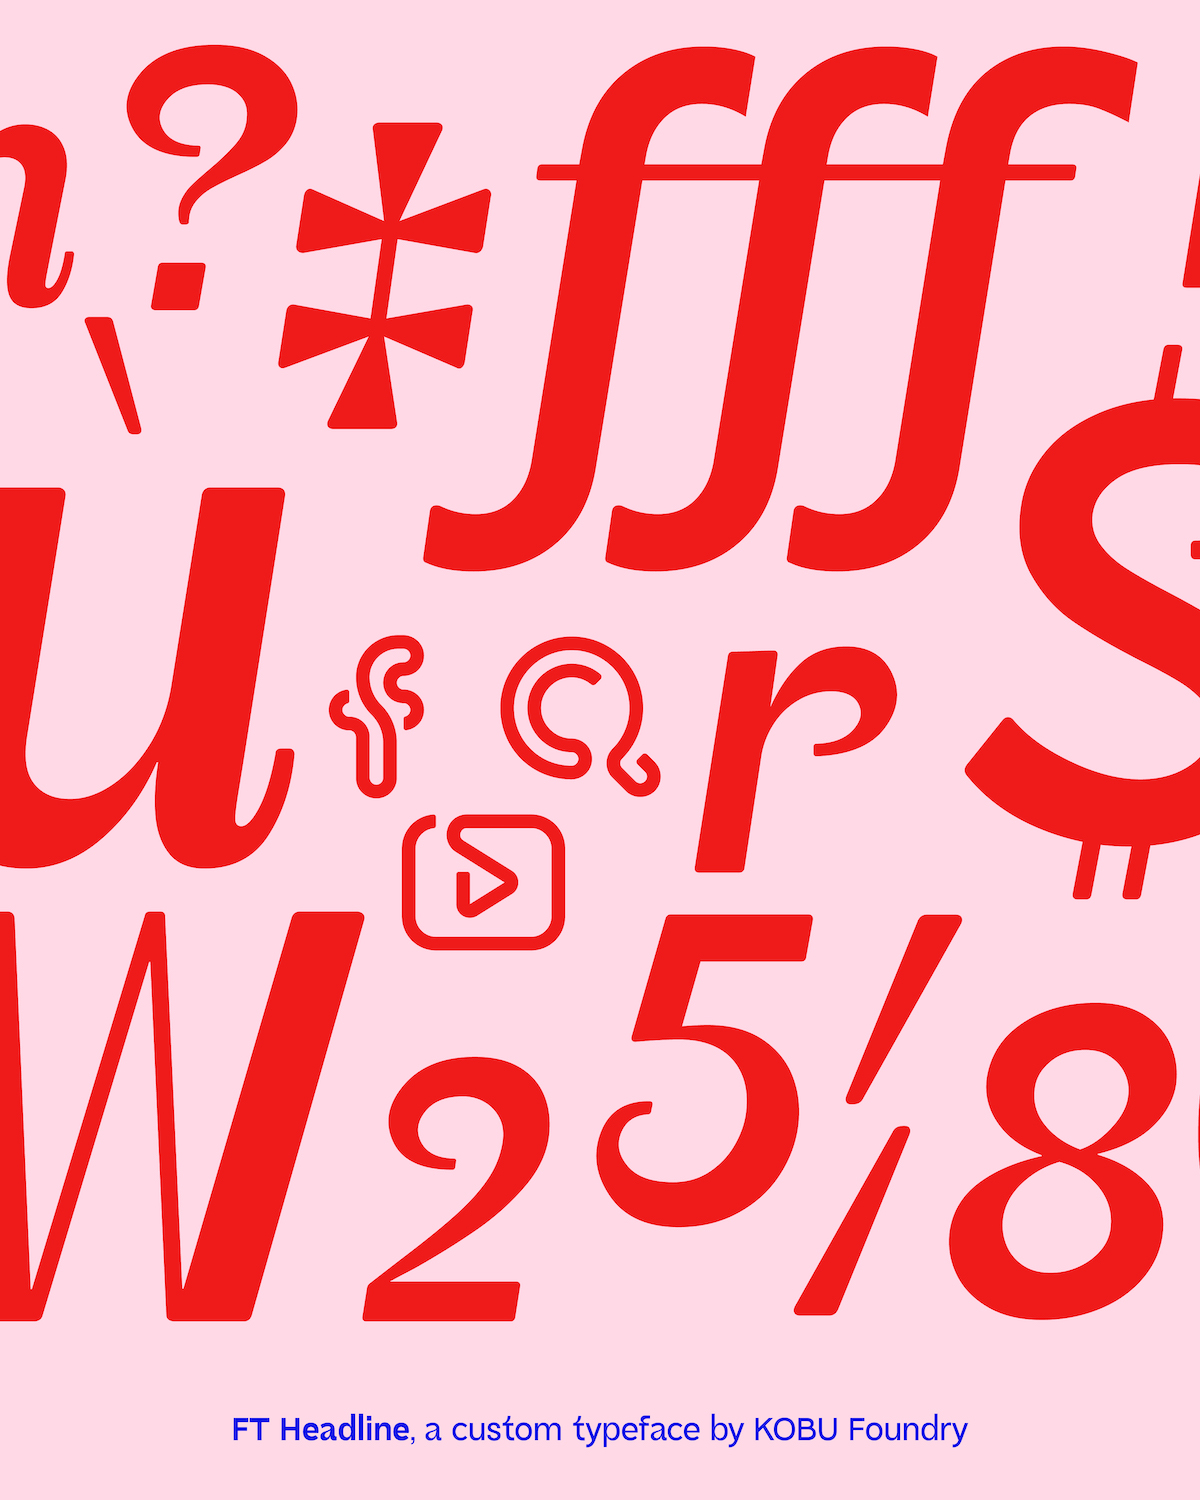 FT Headline, a custom font by KOBU Foundry. A collection of glyphs in red on a pale pink background. 